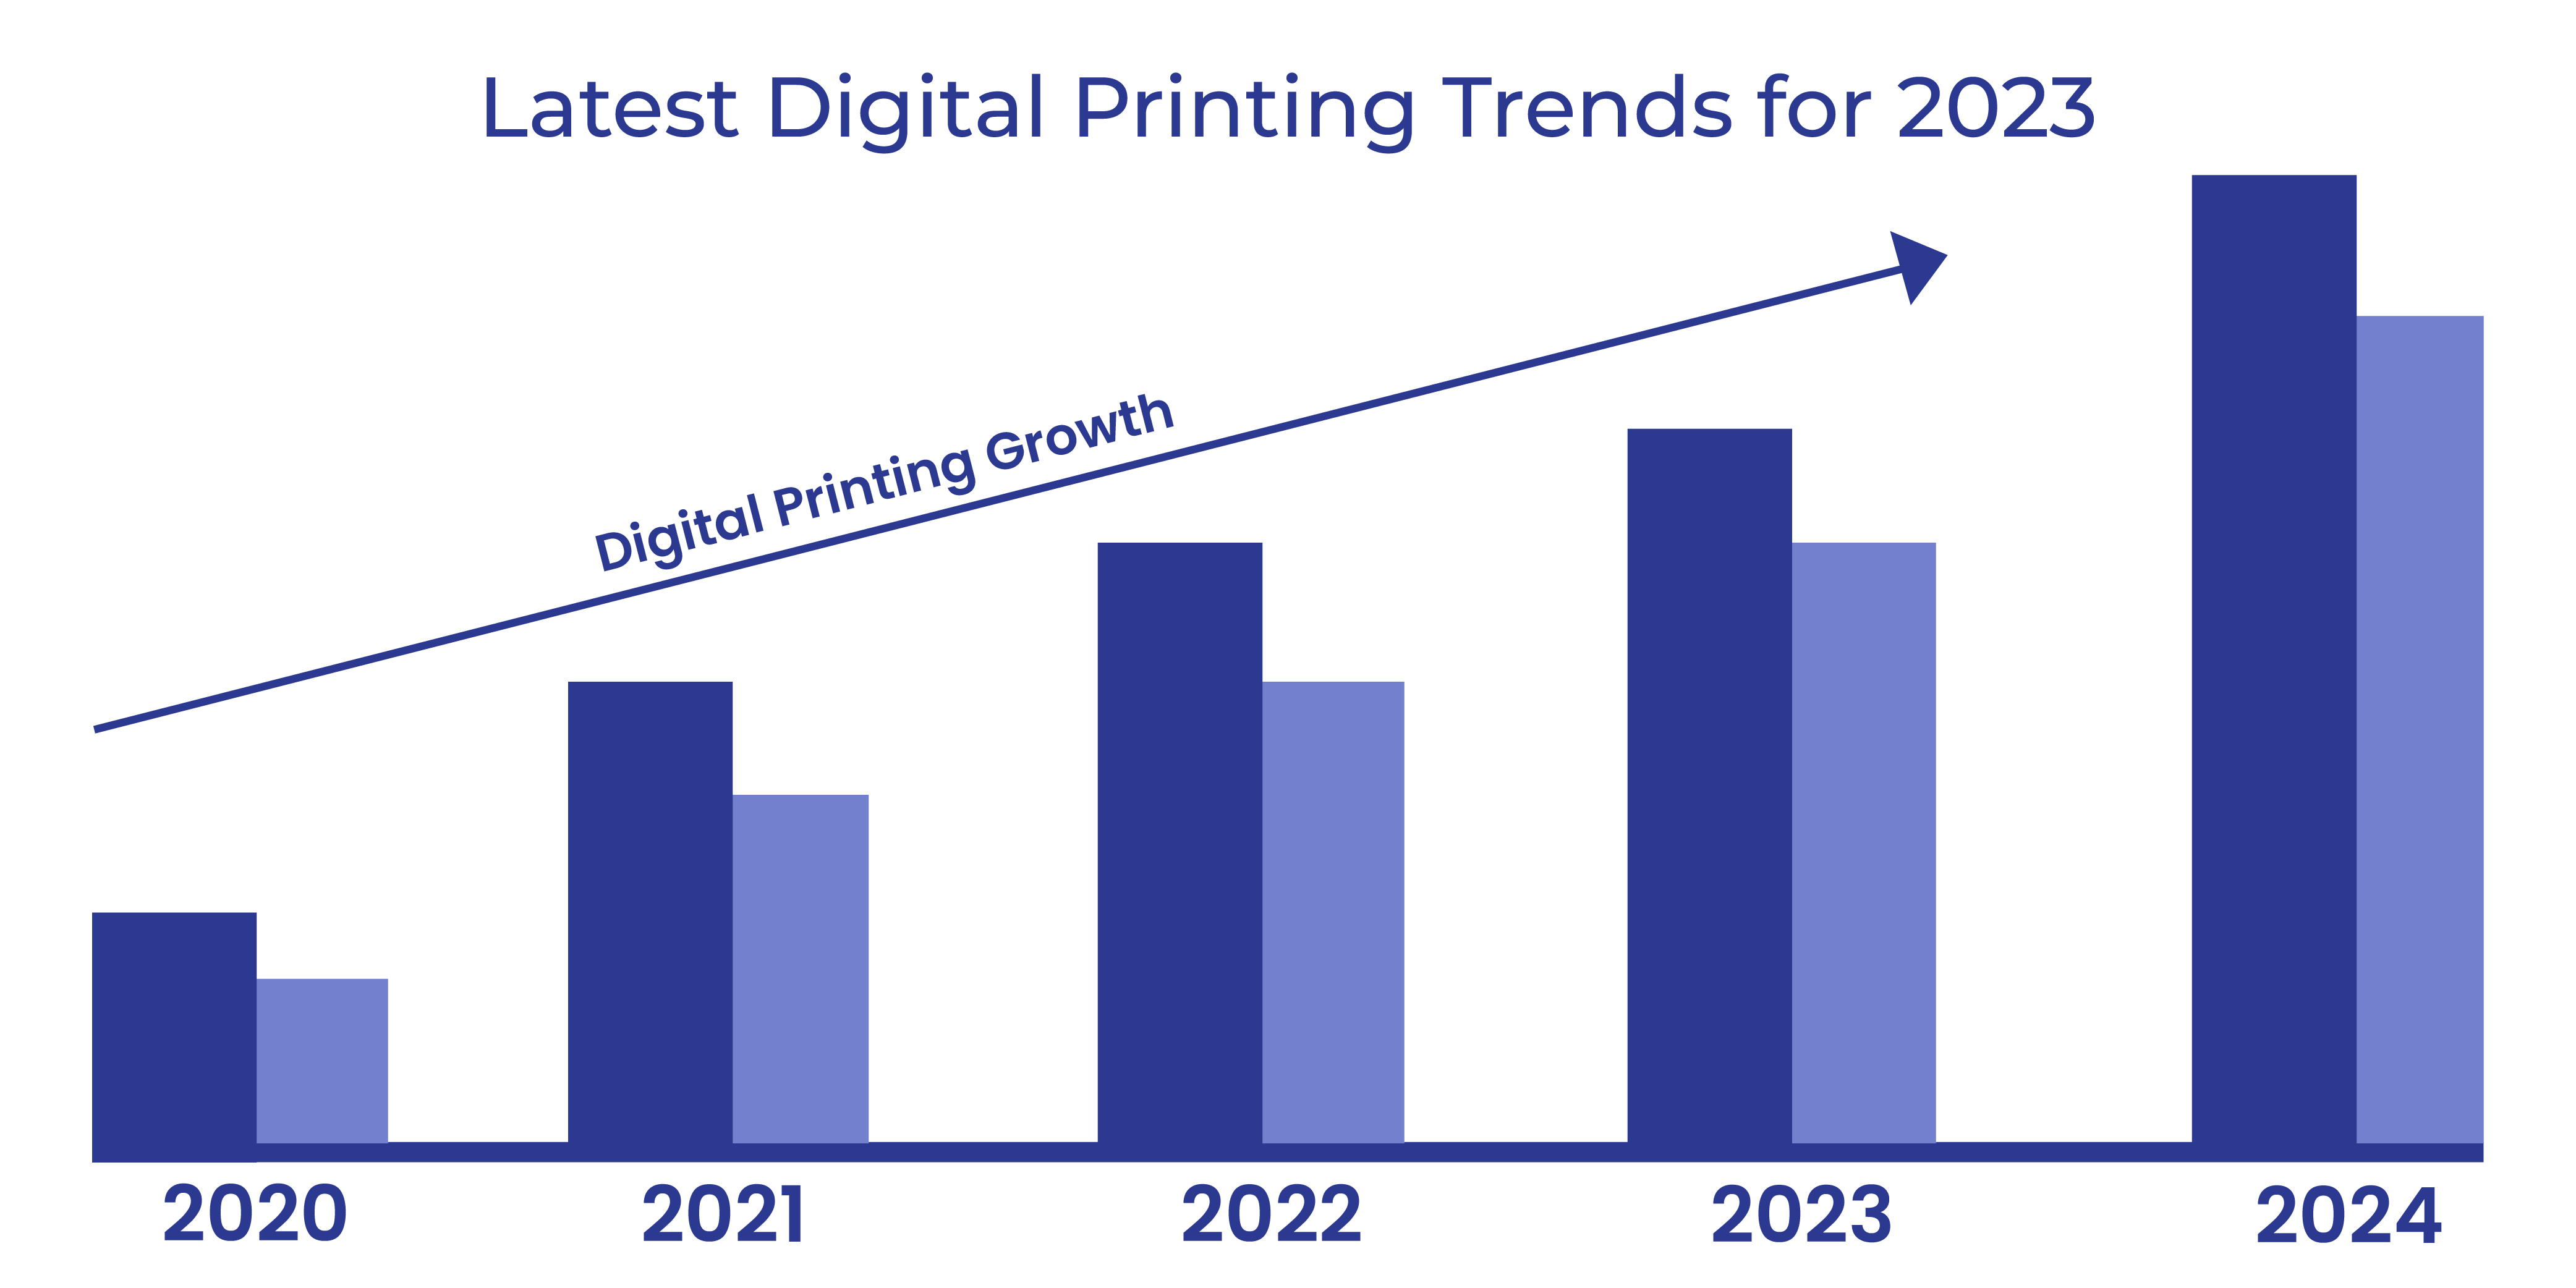 Digital Printing Trends for 2023